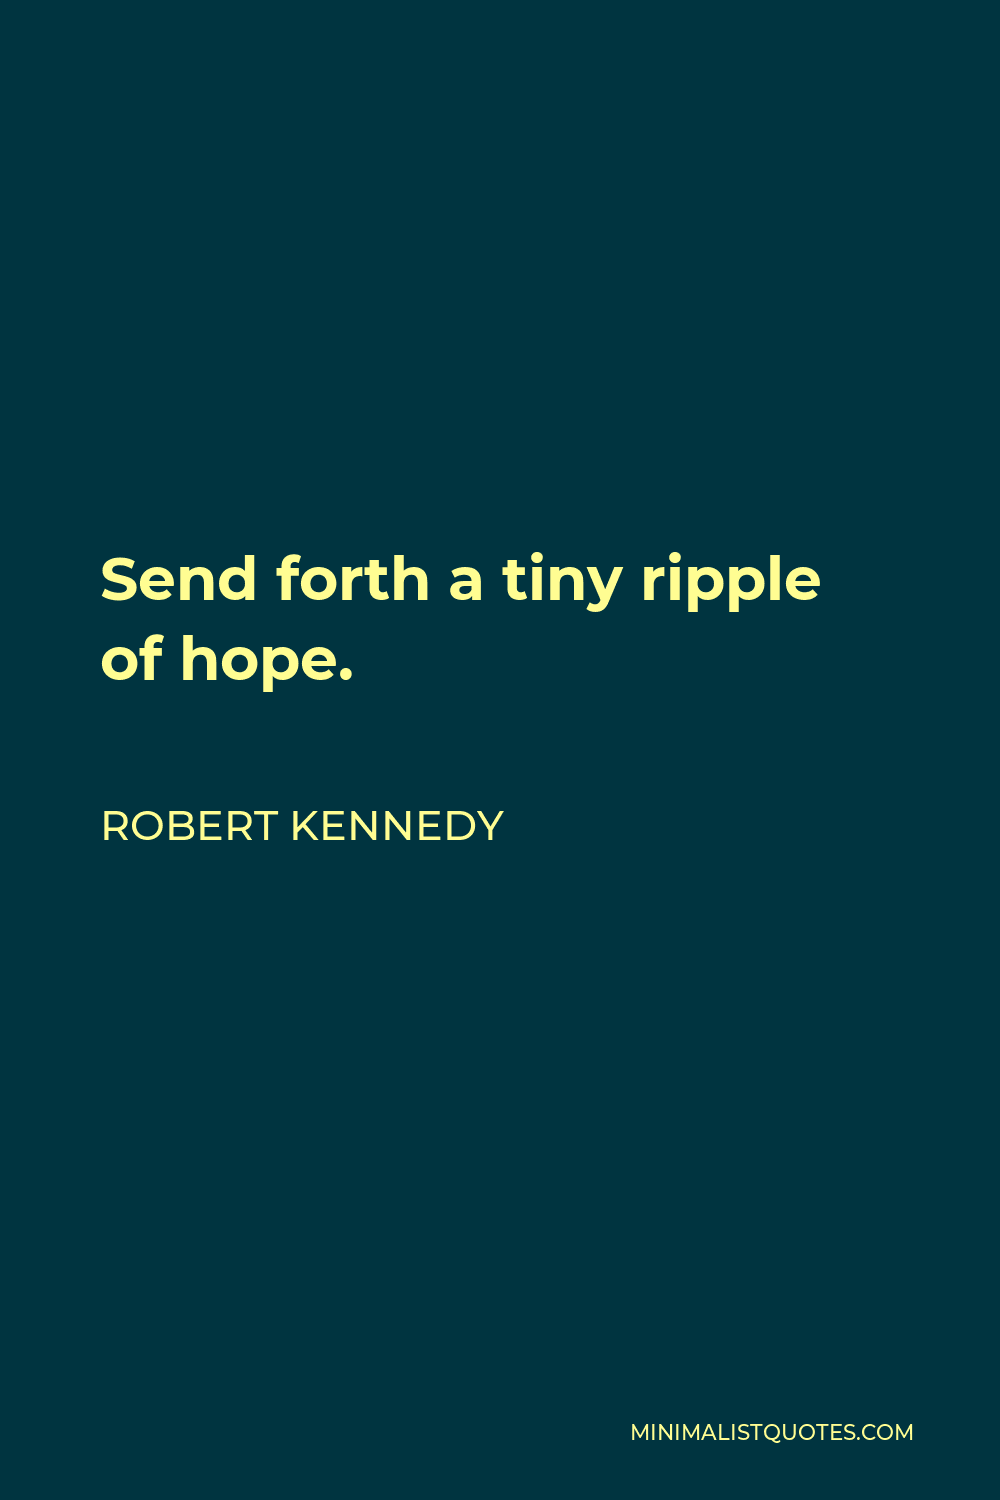 Robert Kennedy Quote - Send forth a tiny ripple of hope.